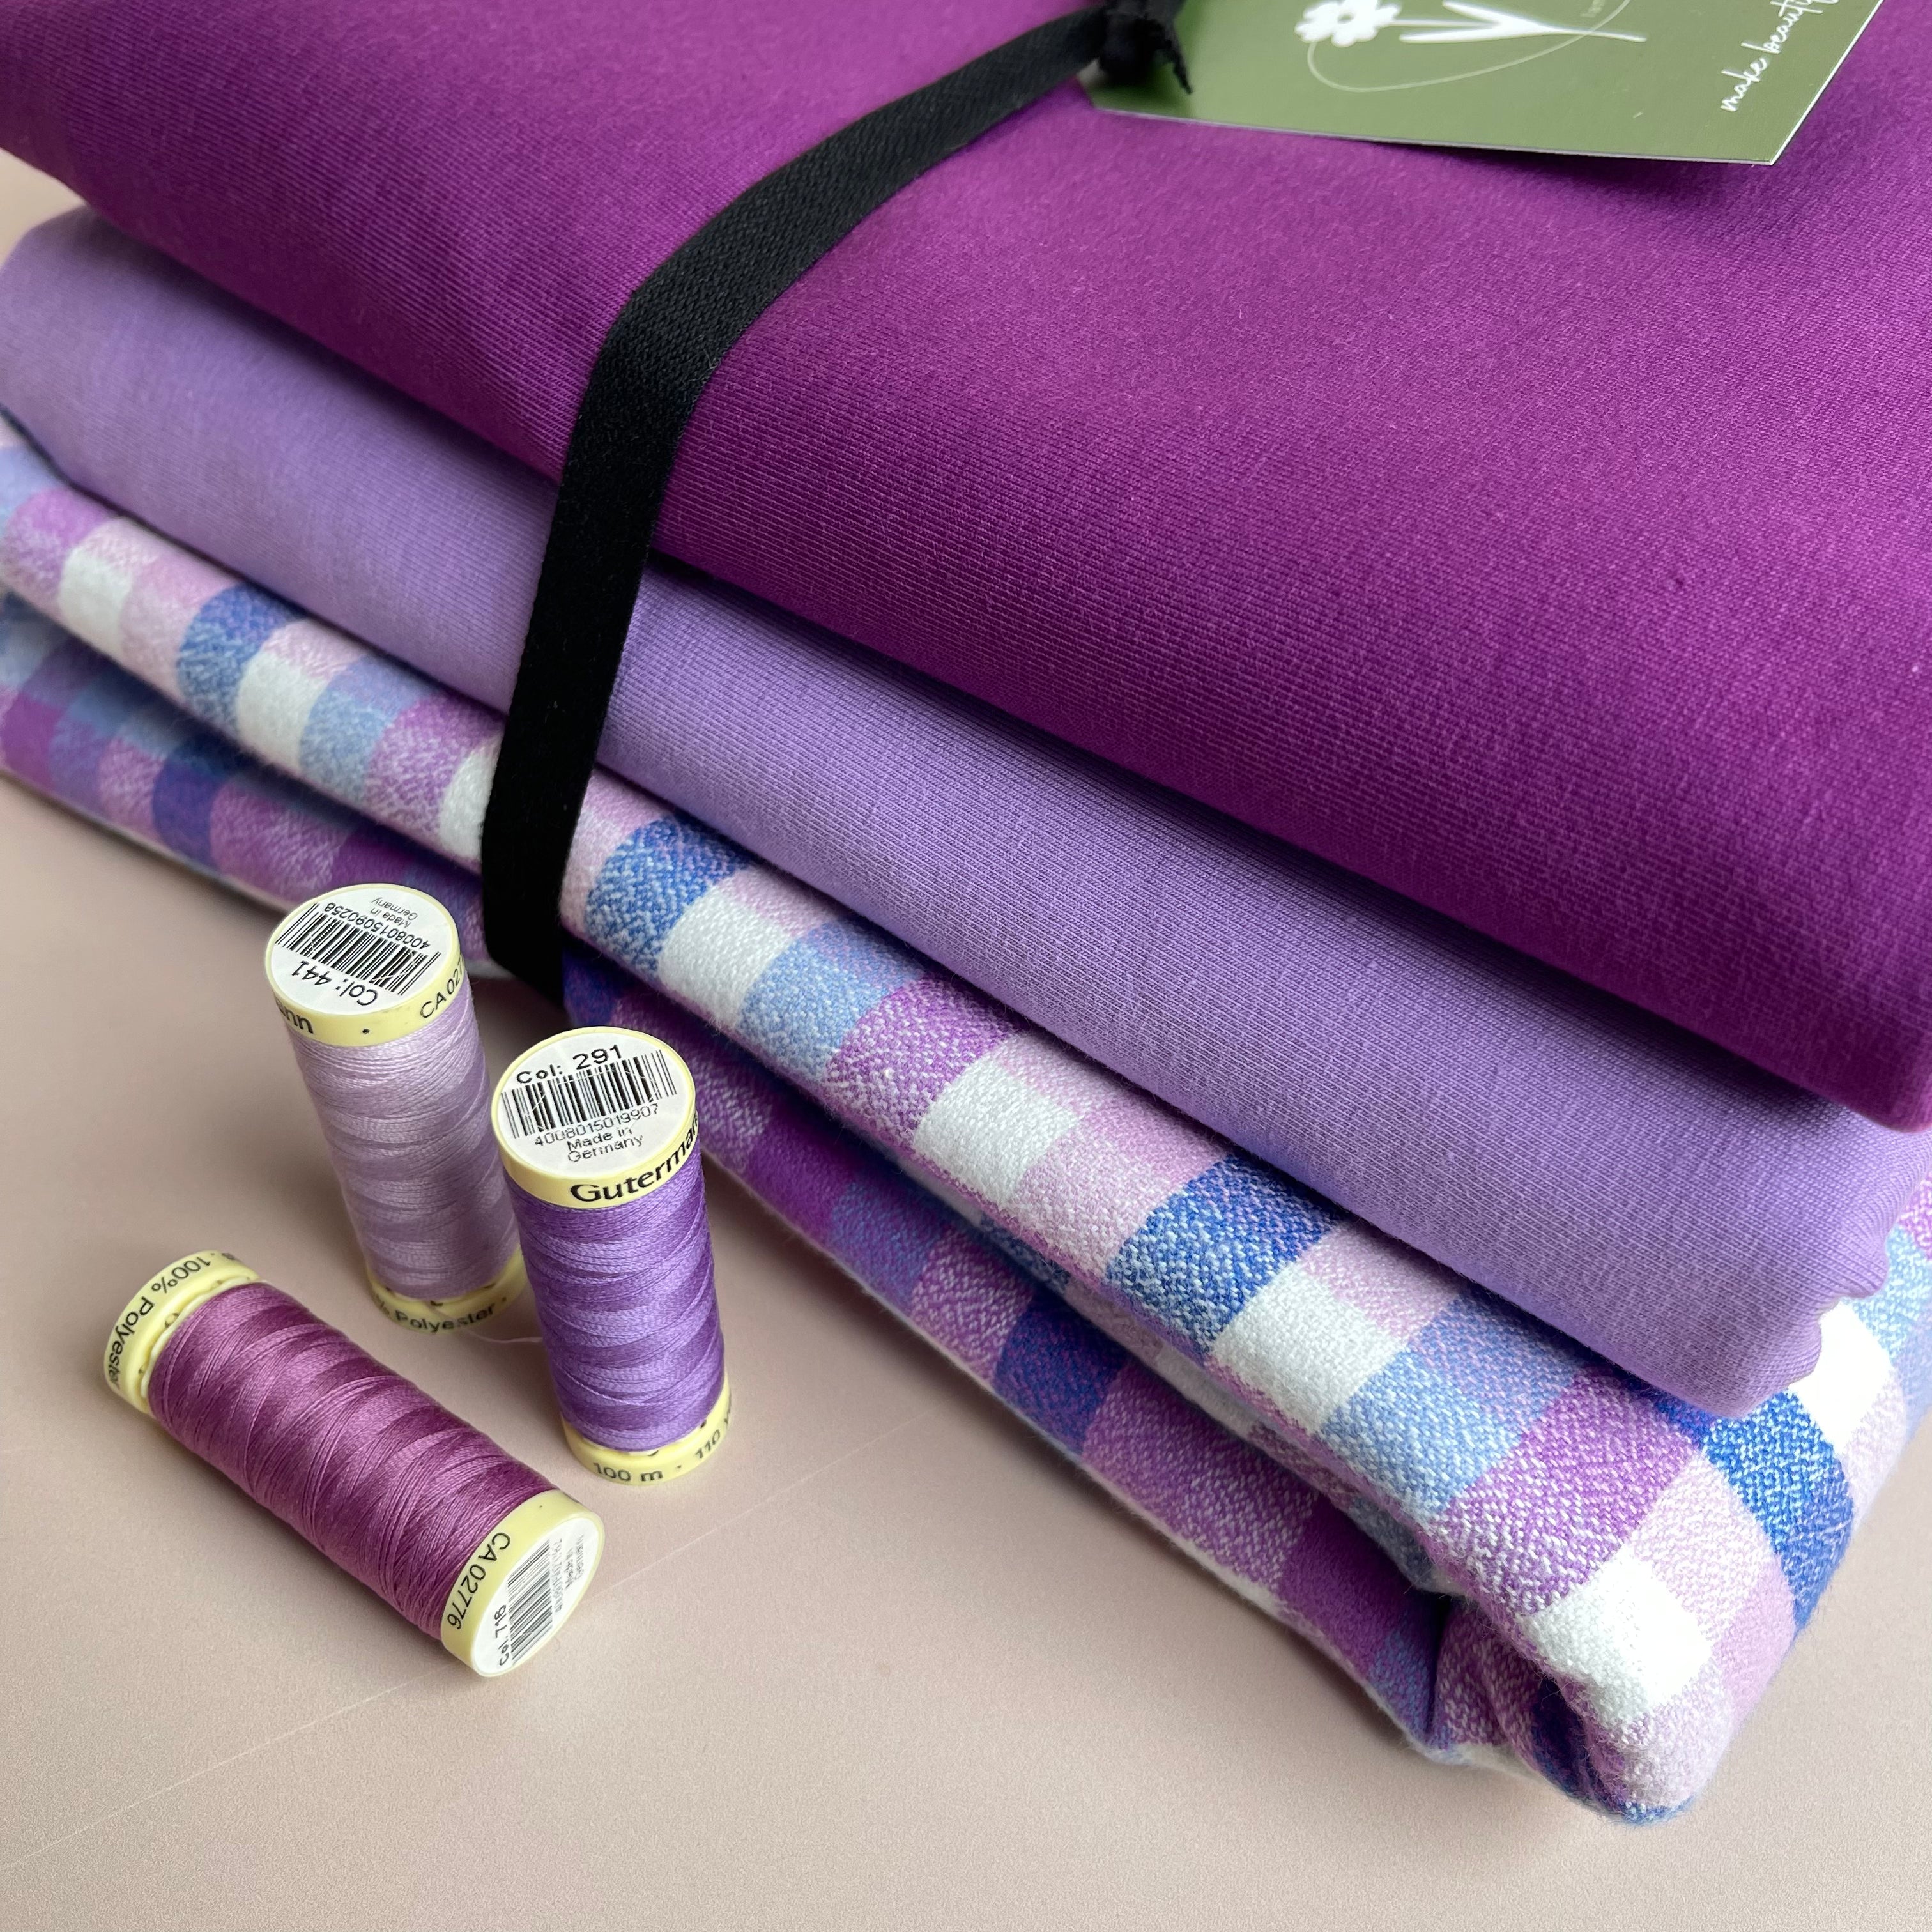 Limited Edition - Luxury Pyjama Kit with Lilac Mammoth Flannel